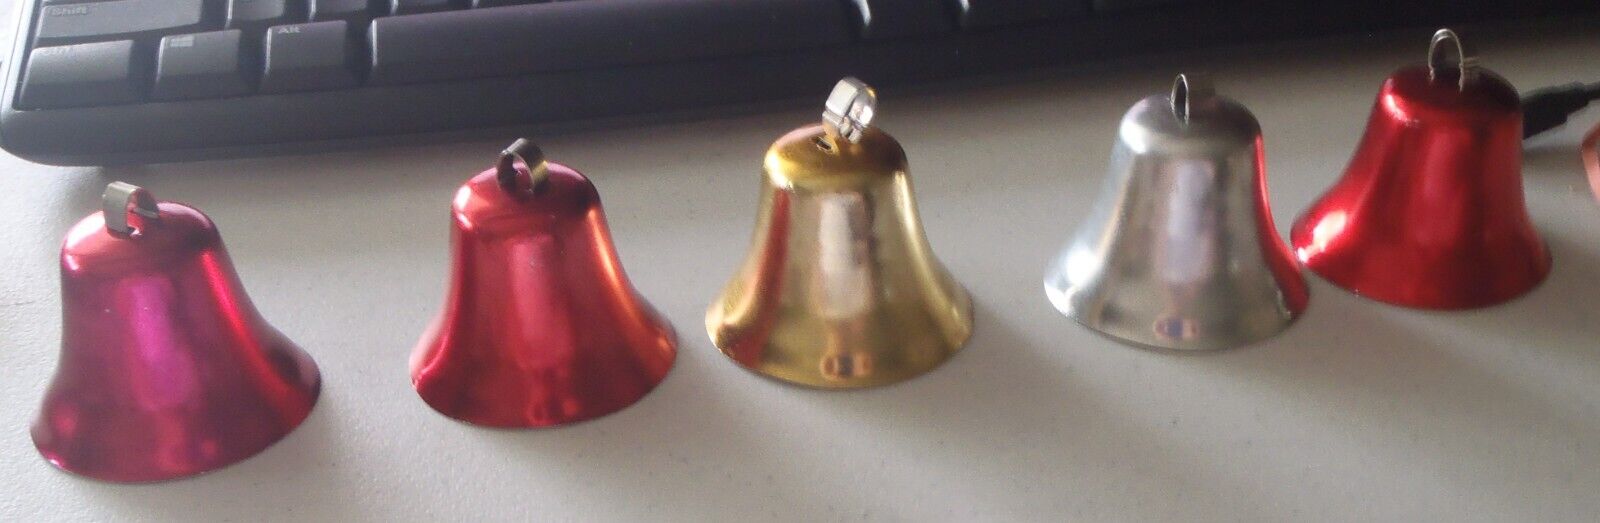 Vintage Aluminum Bells - Set of 5 - 2 inches tall each